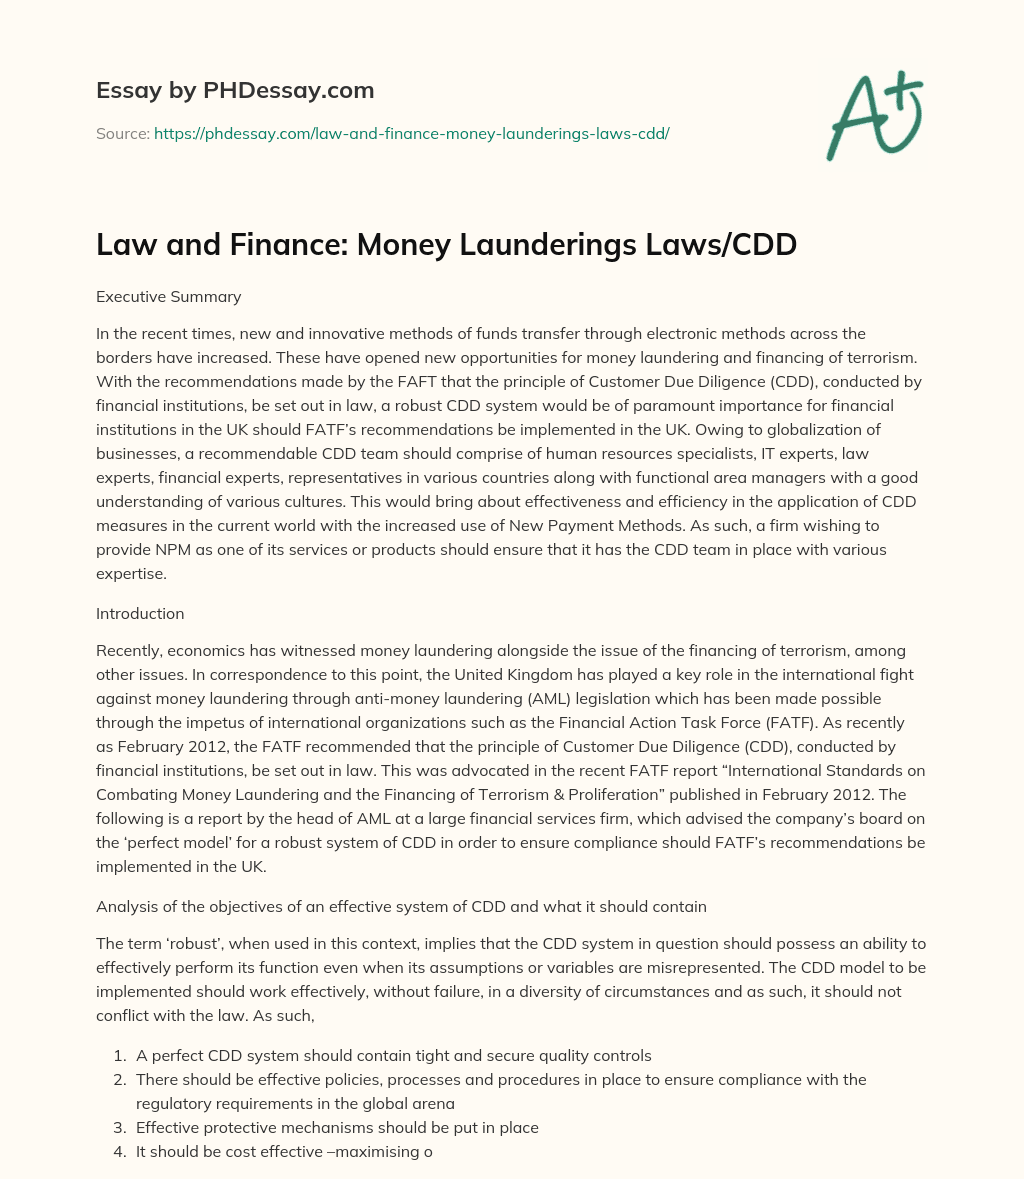 Law and Finance: Money Launderings Laws/CDD essay